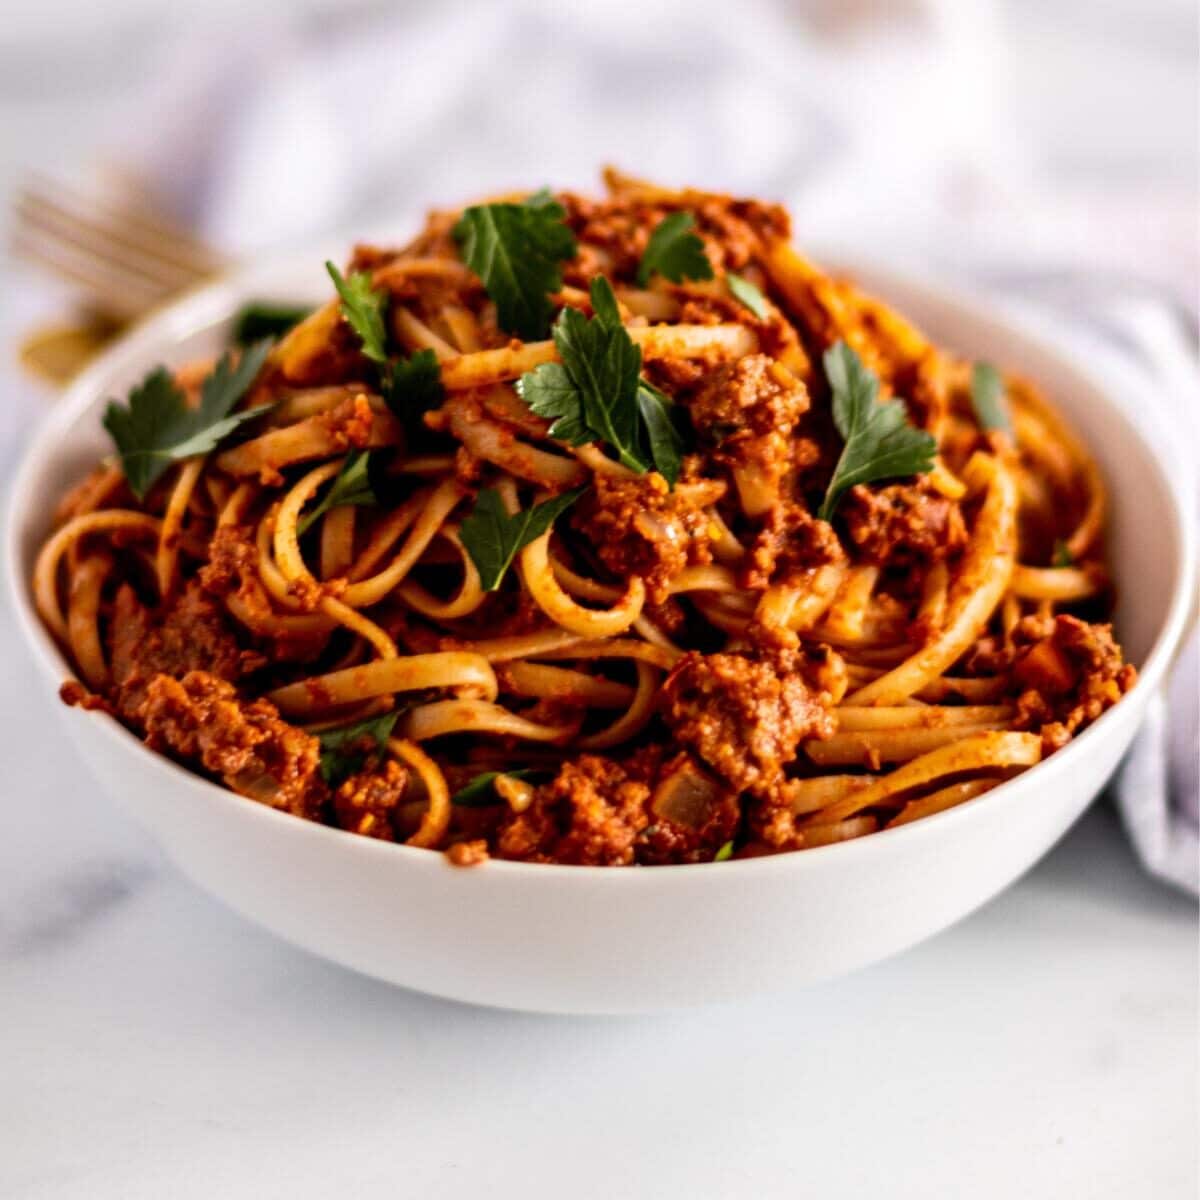 Bowl of spaghetti with vegan bolognese sauce garnished with fresh parsley.